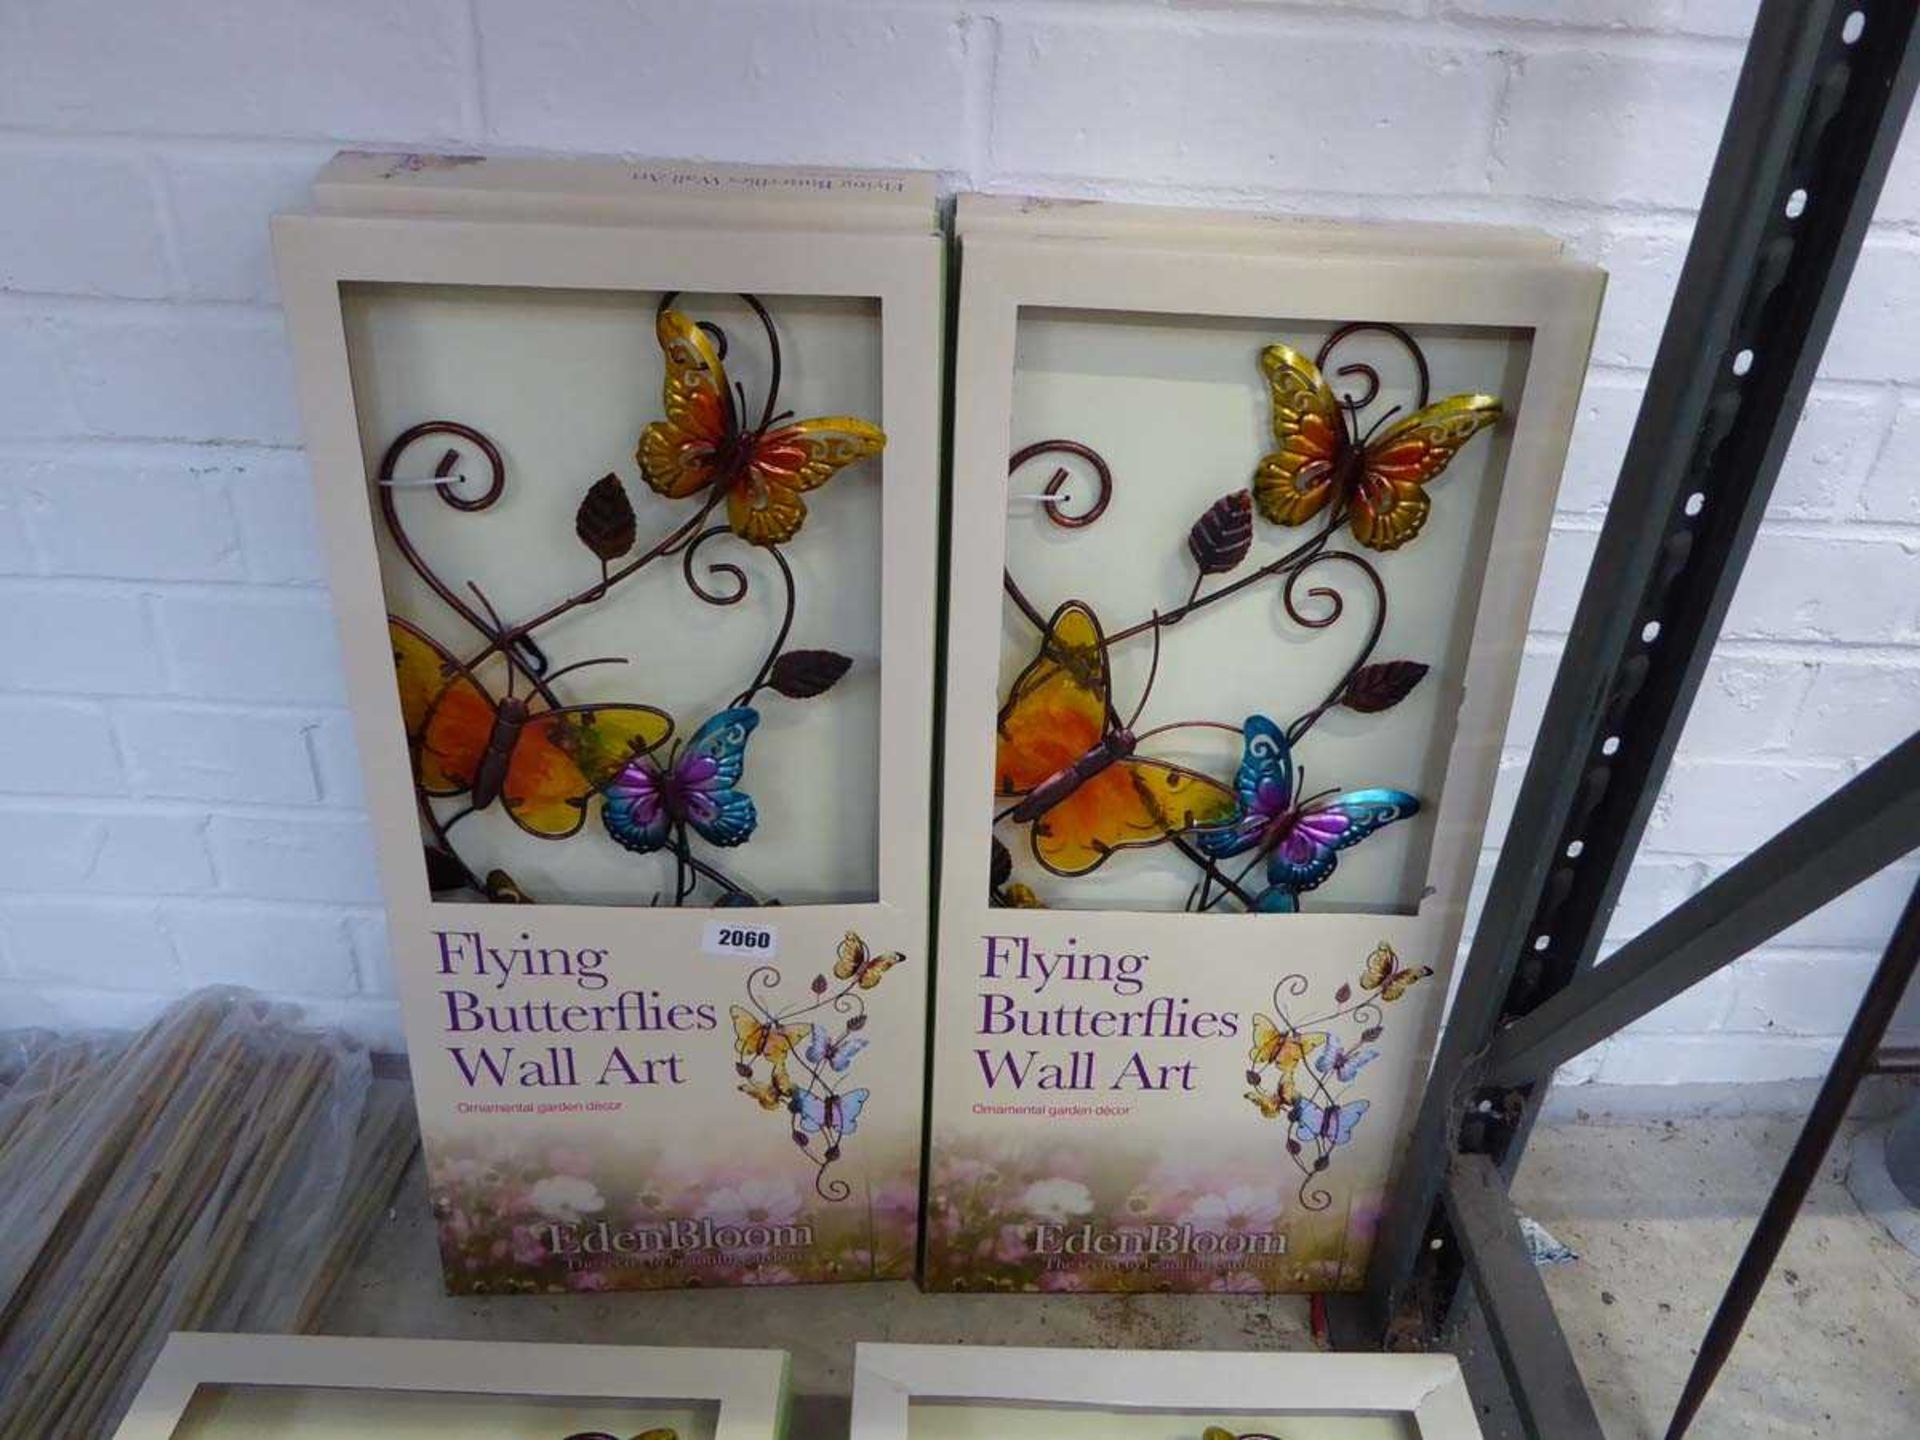 4 boxed Eden Bloom flying butterfly wall art pieces